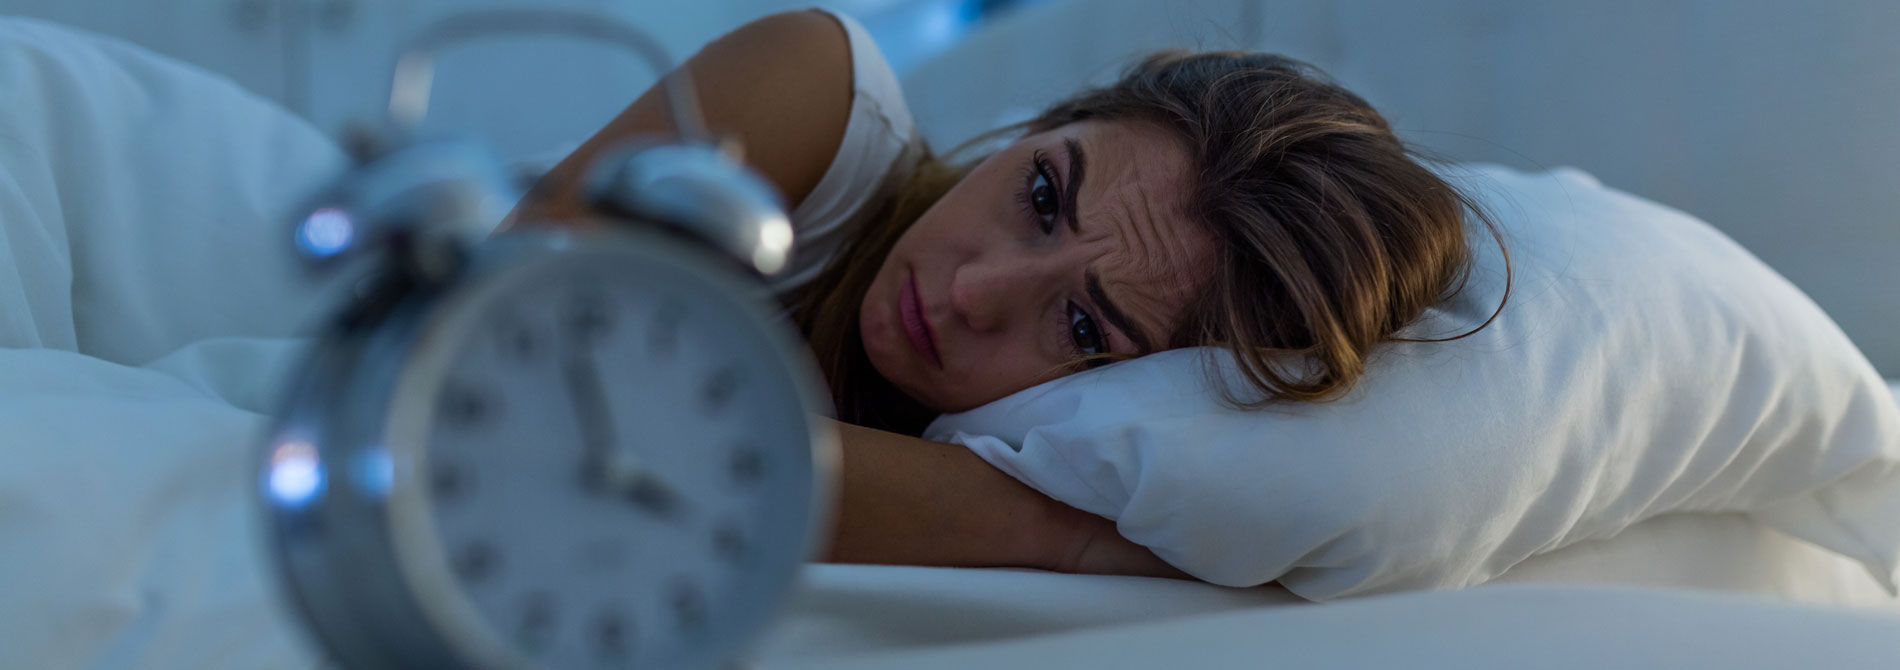 Woman in bed awake suffering from insomnia